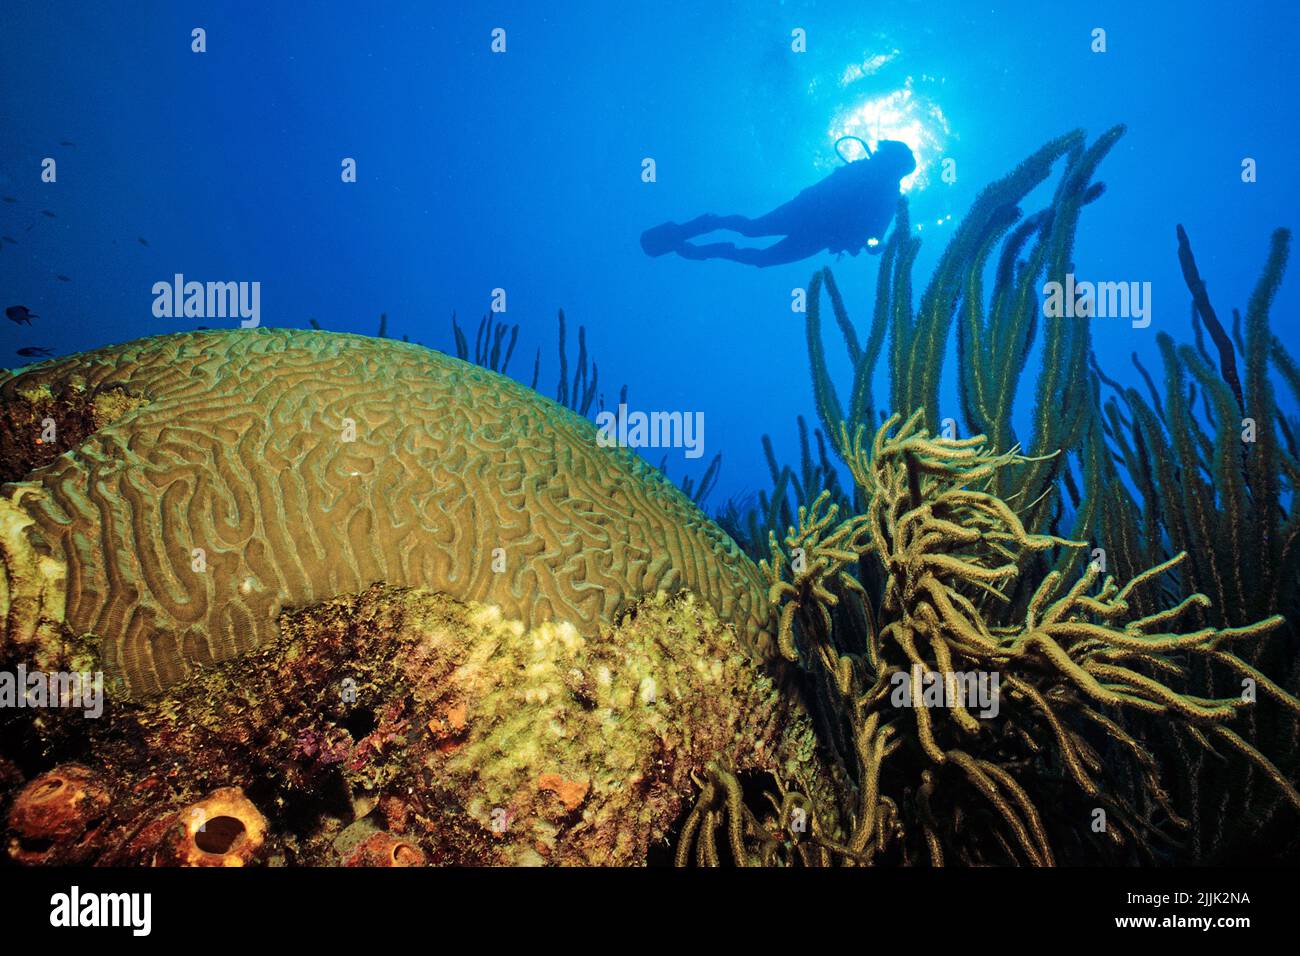 Scuba diver in a caribbean coral reef, Boulder brain coral (Colpophyllia natans) and soft corals, Curacao, Netherland Antilles, Antilles, Caribbean Stock Photo